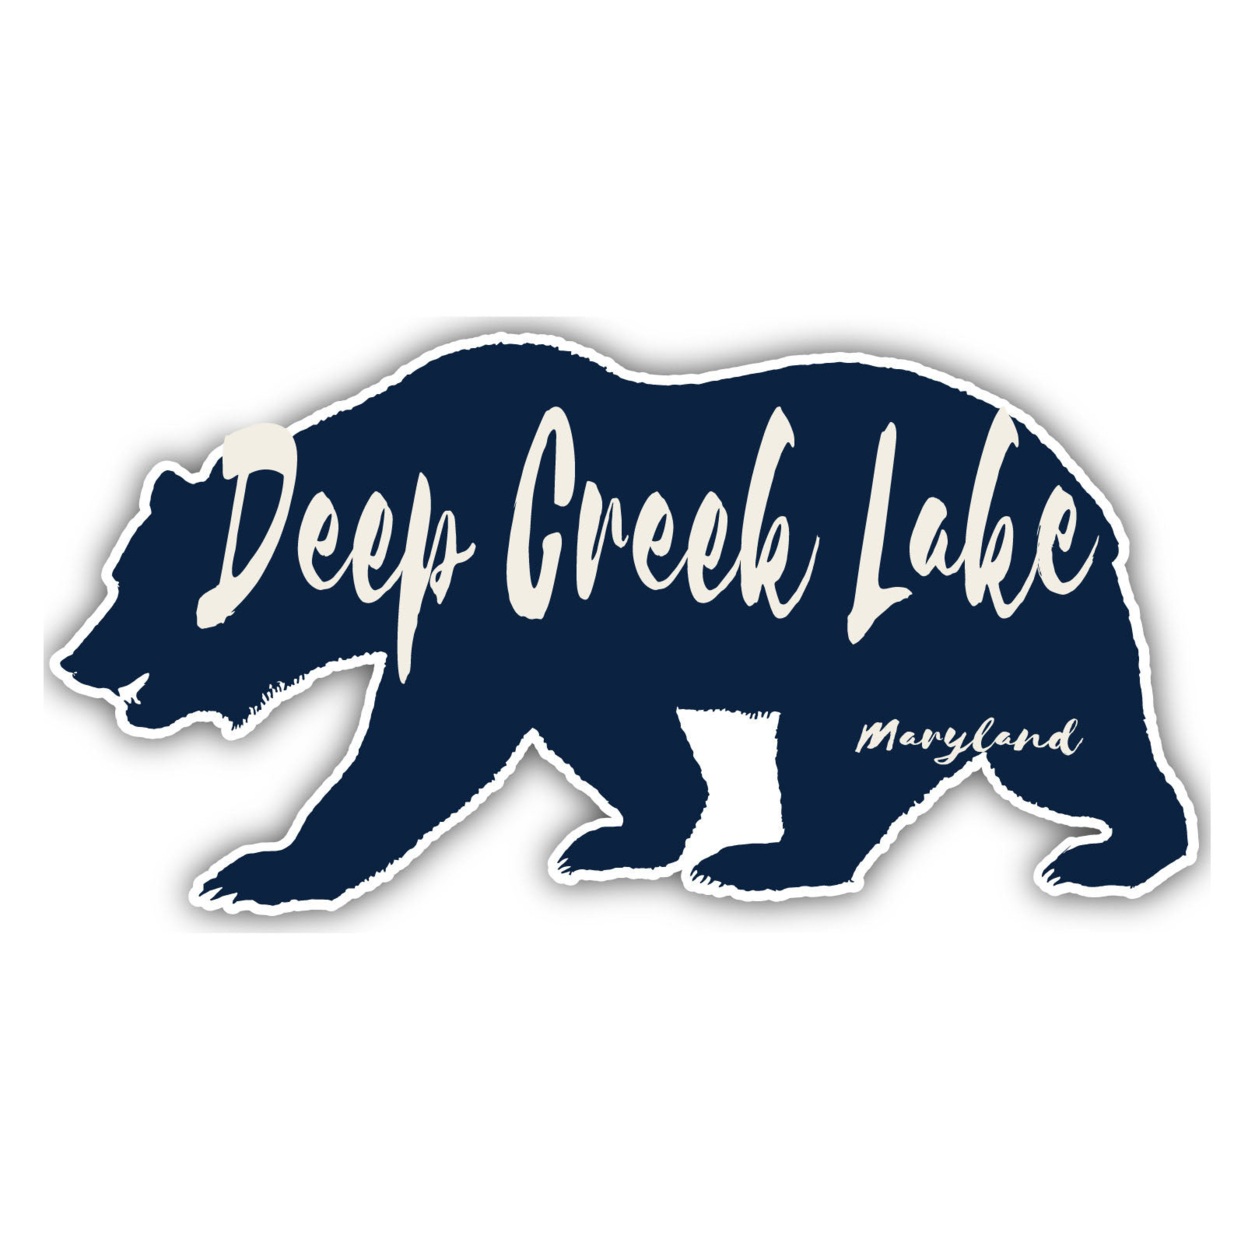 Deep Creek Lake Maryland Souvenir Decorative Stickers (Choose Theme And Size) - 4-Pack, 12-Inch, Bear